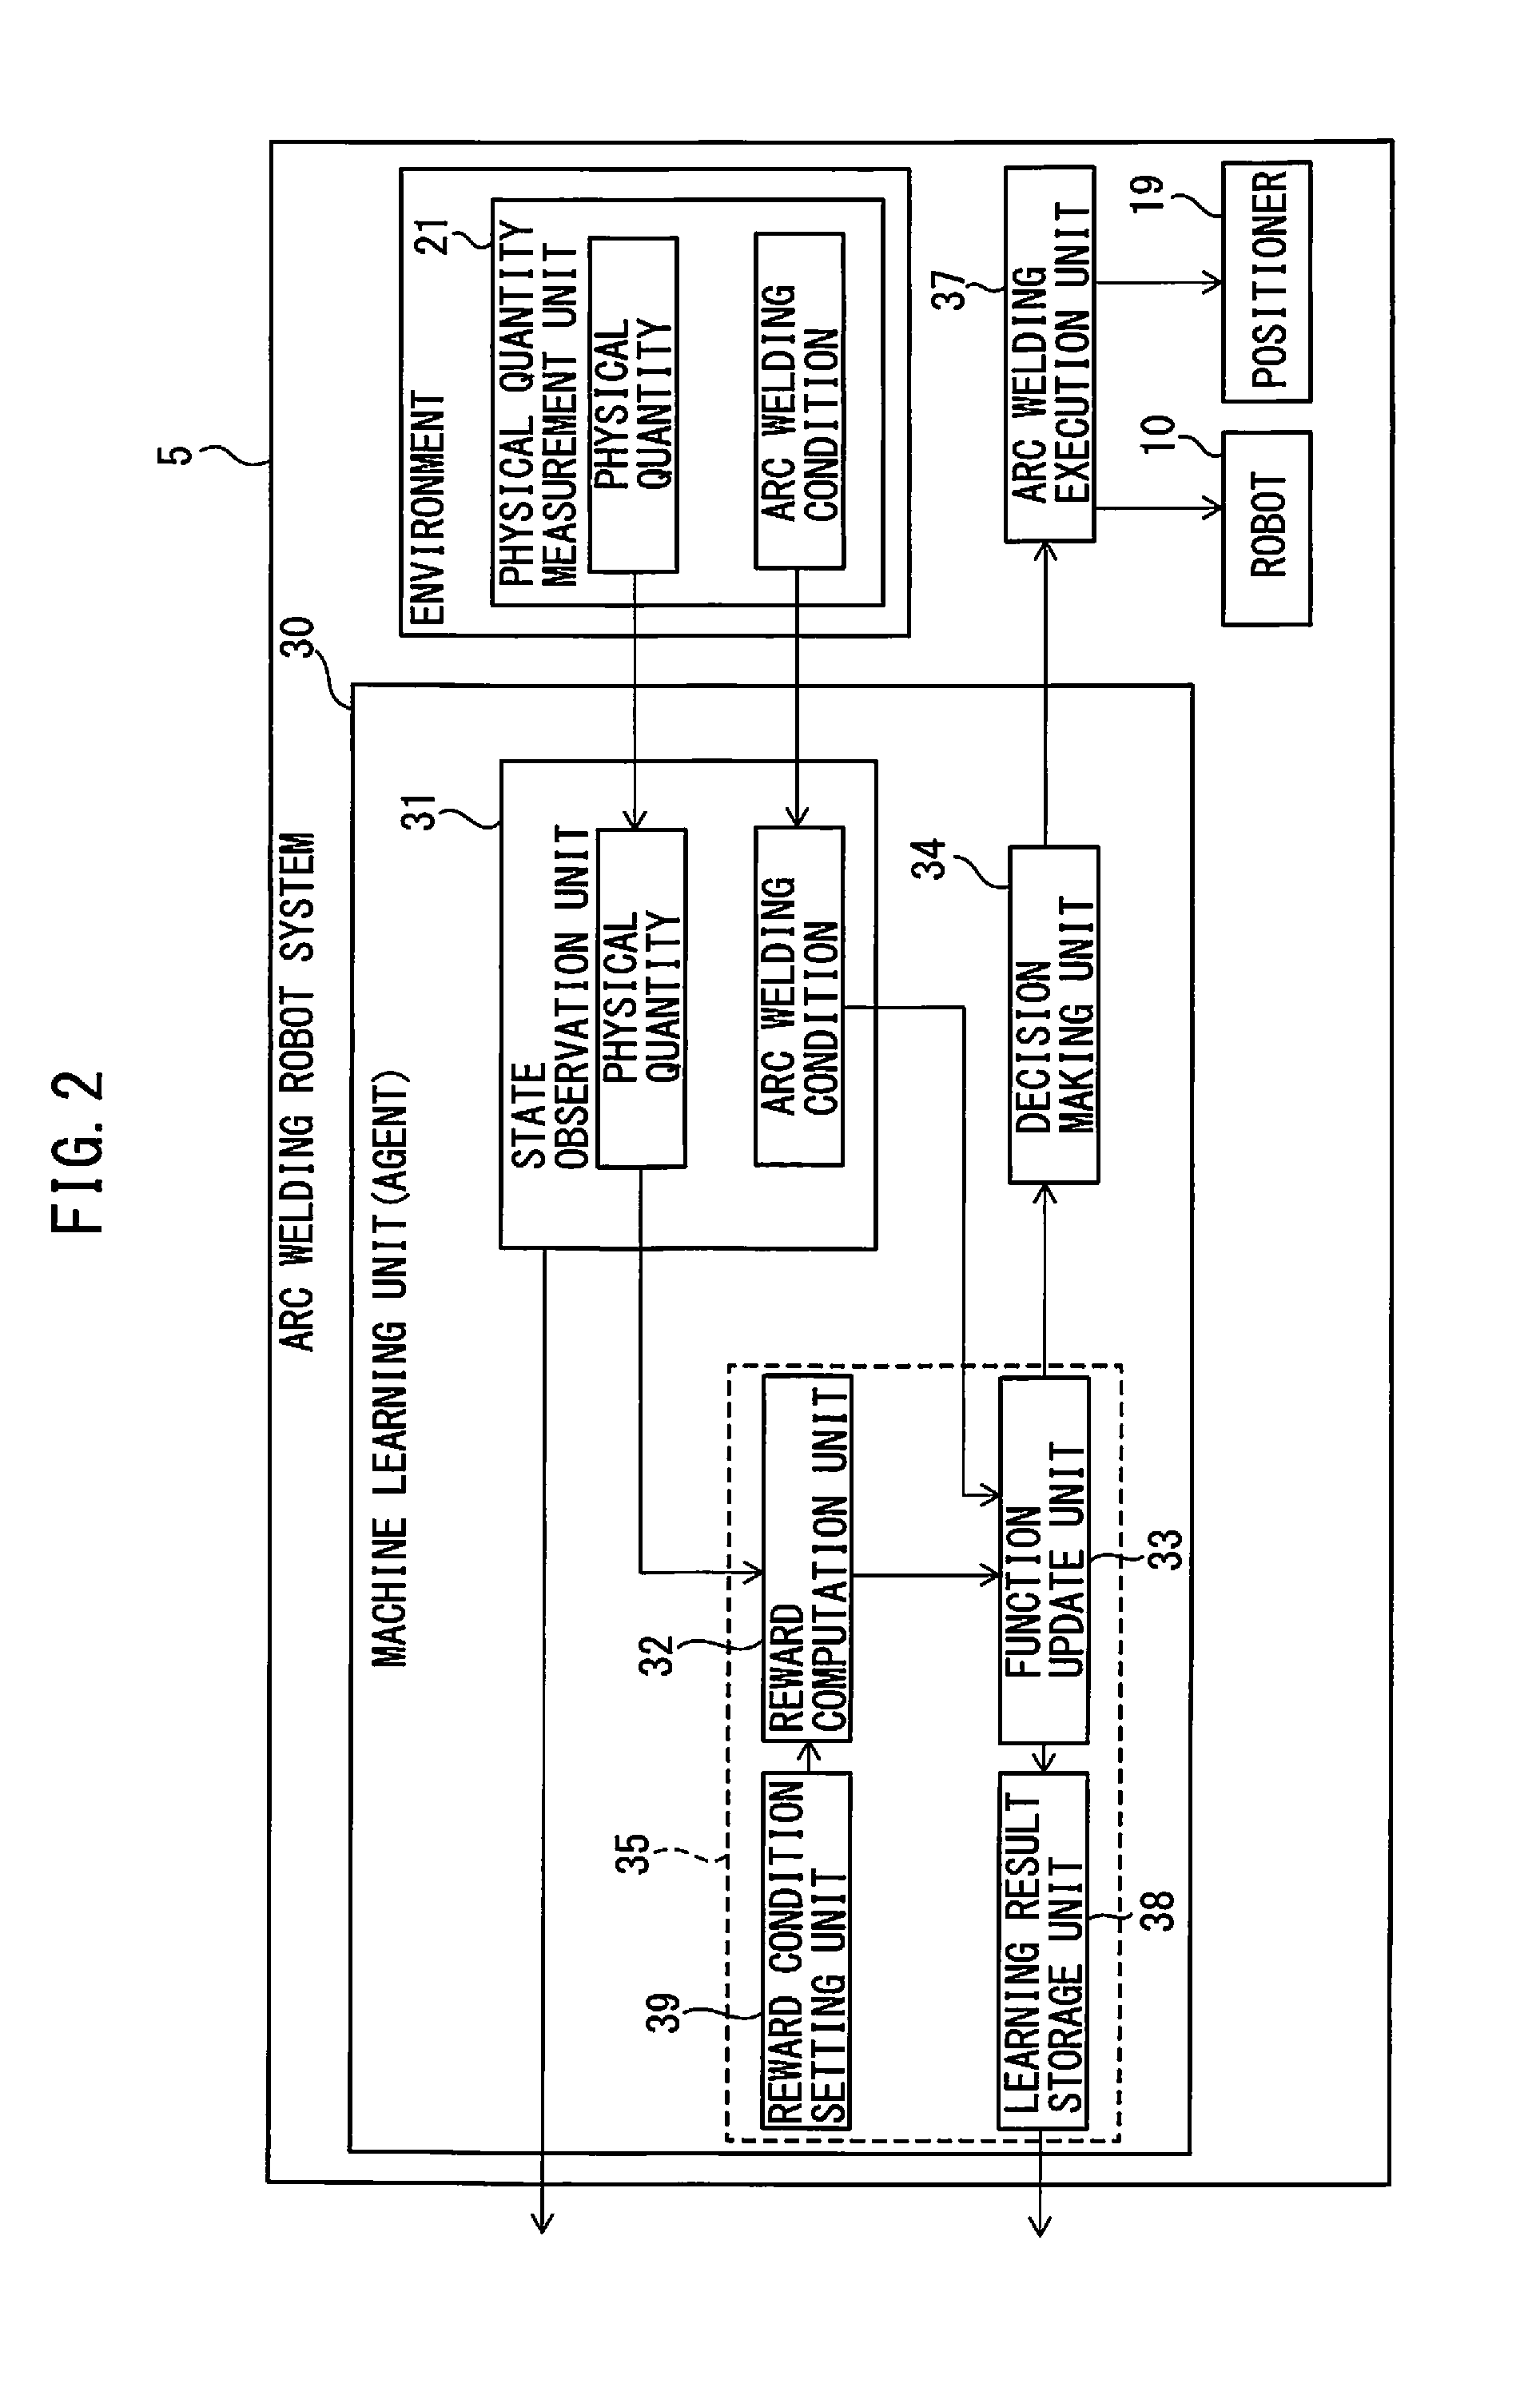 Machine learning device, arc welding control device, arc welding robot system, and welding system